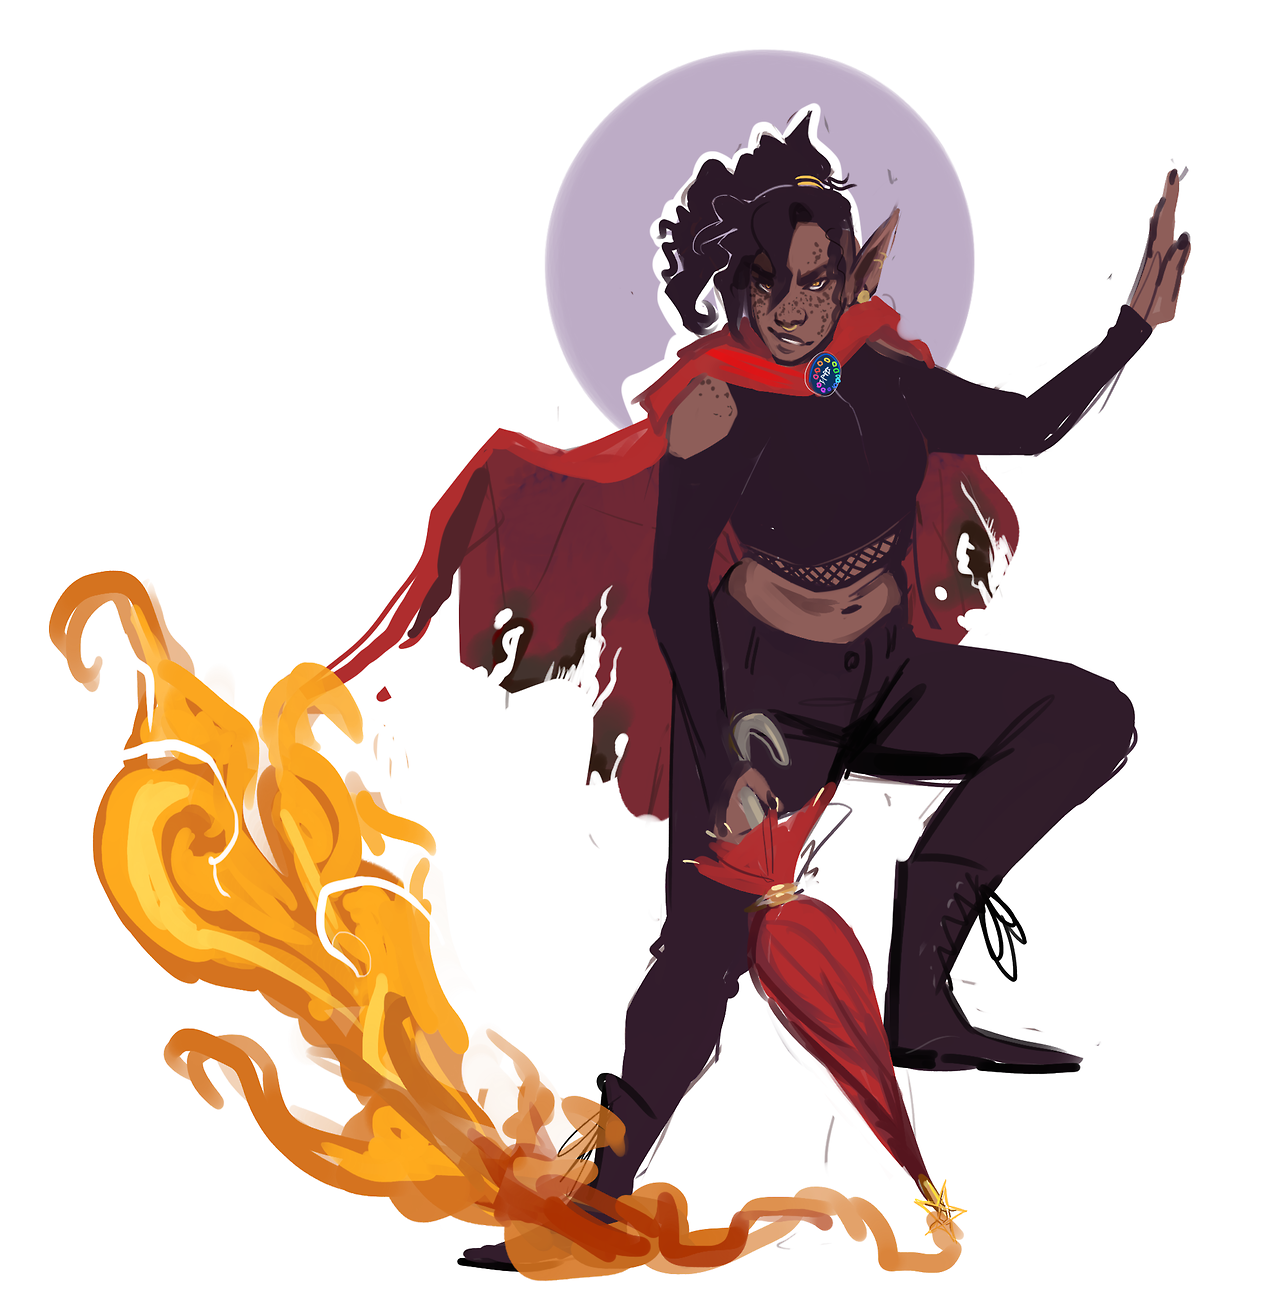 Lup_by_Foxaes.png